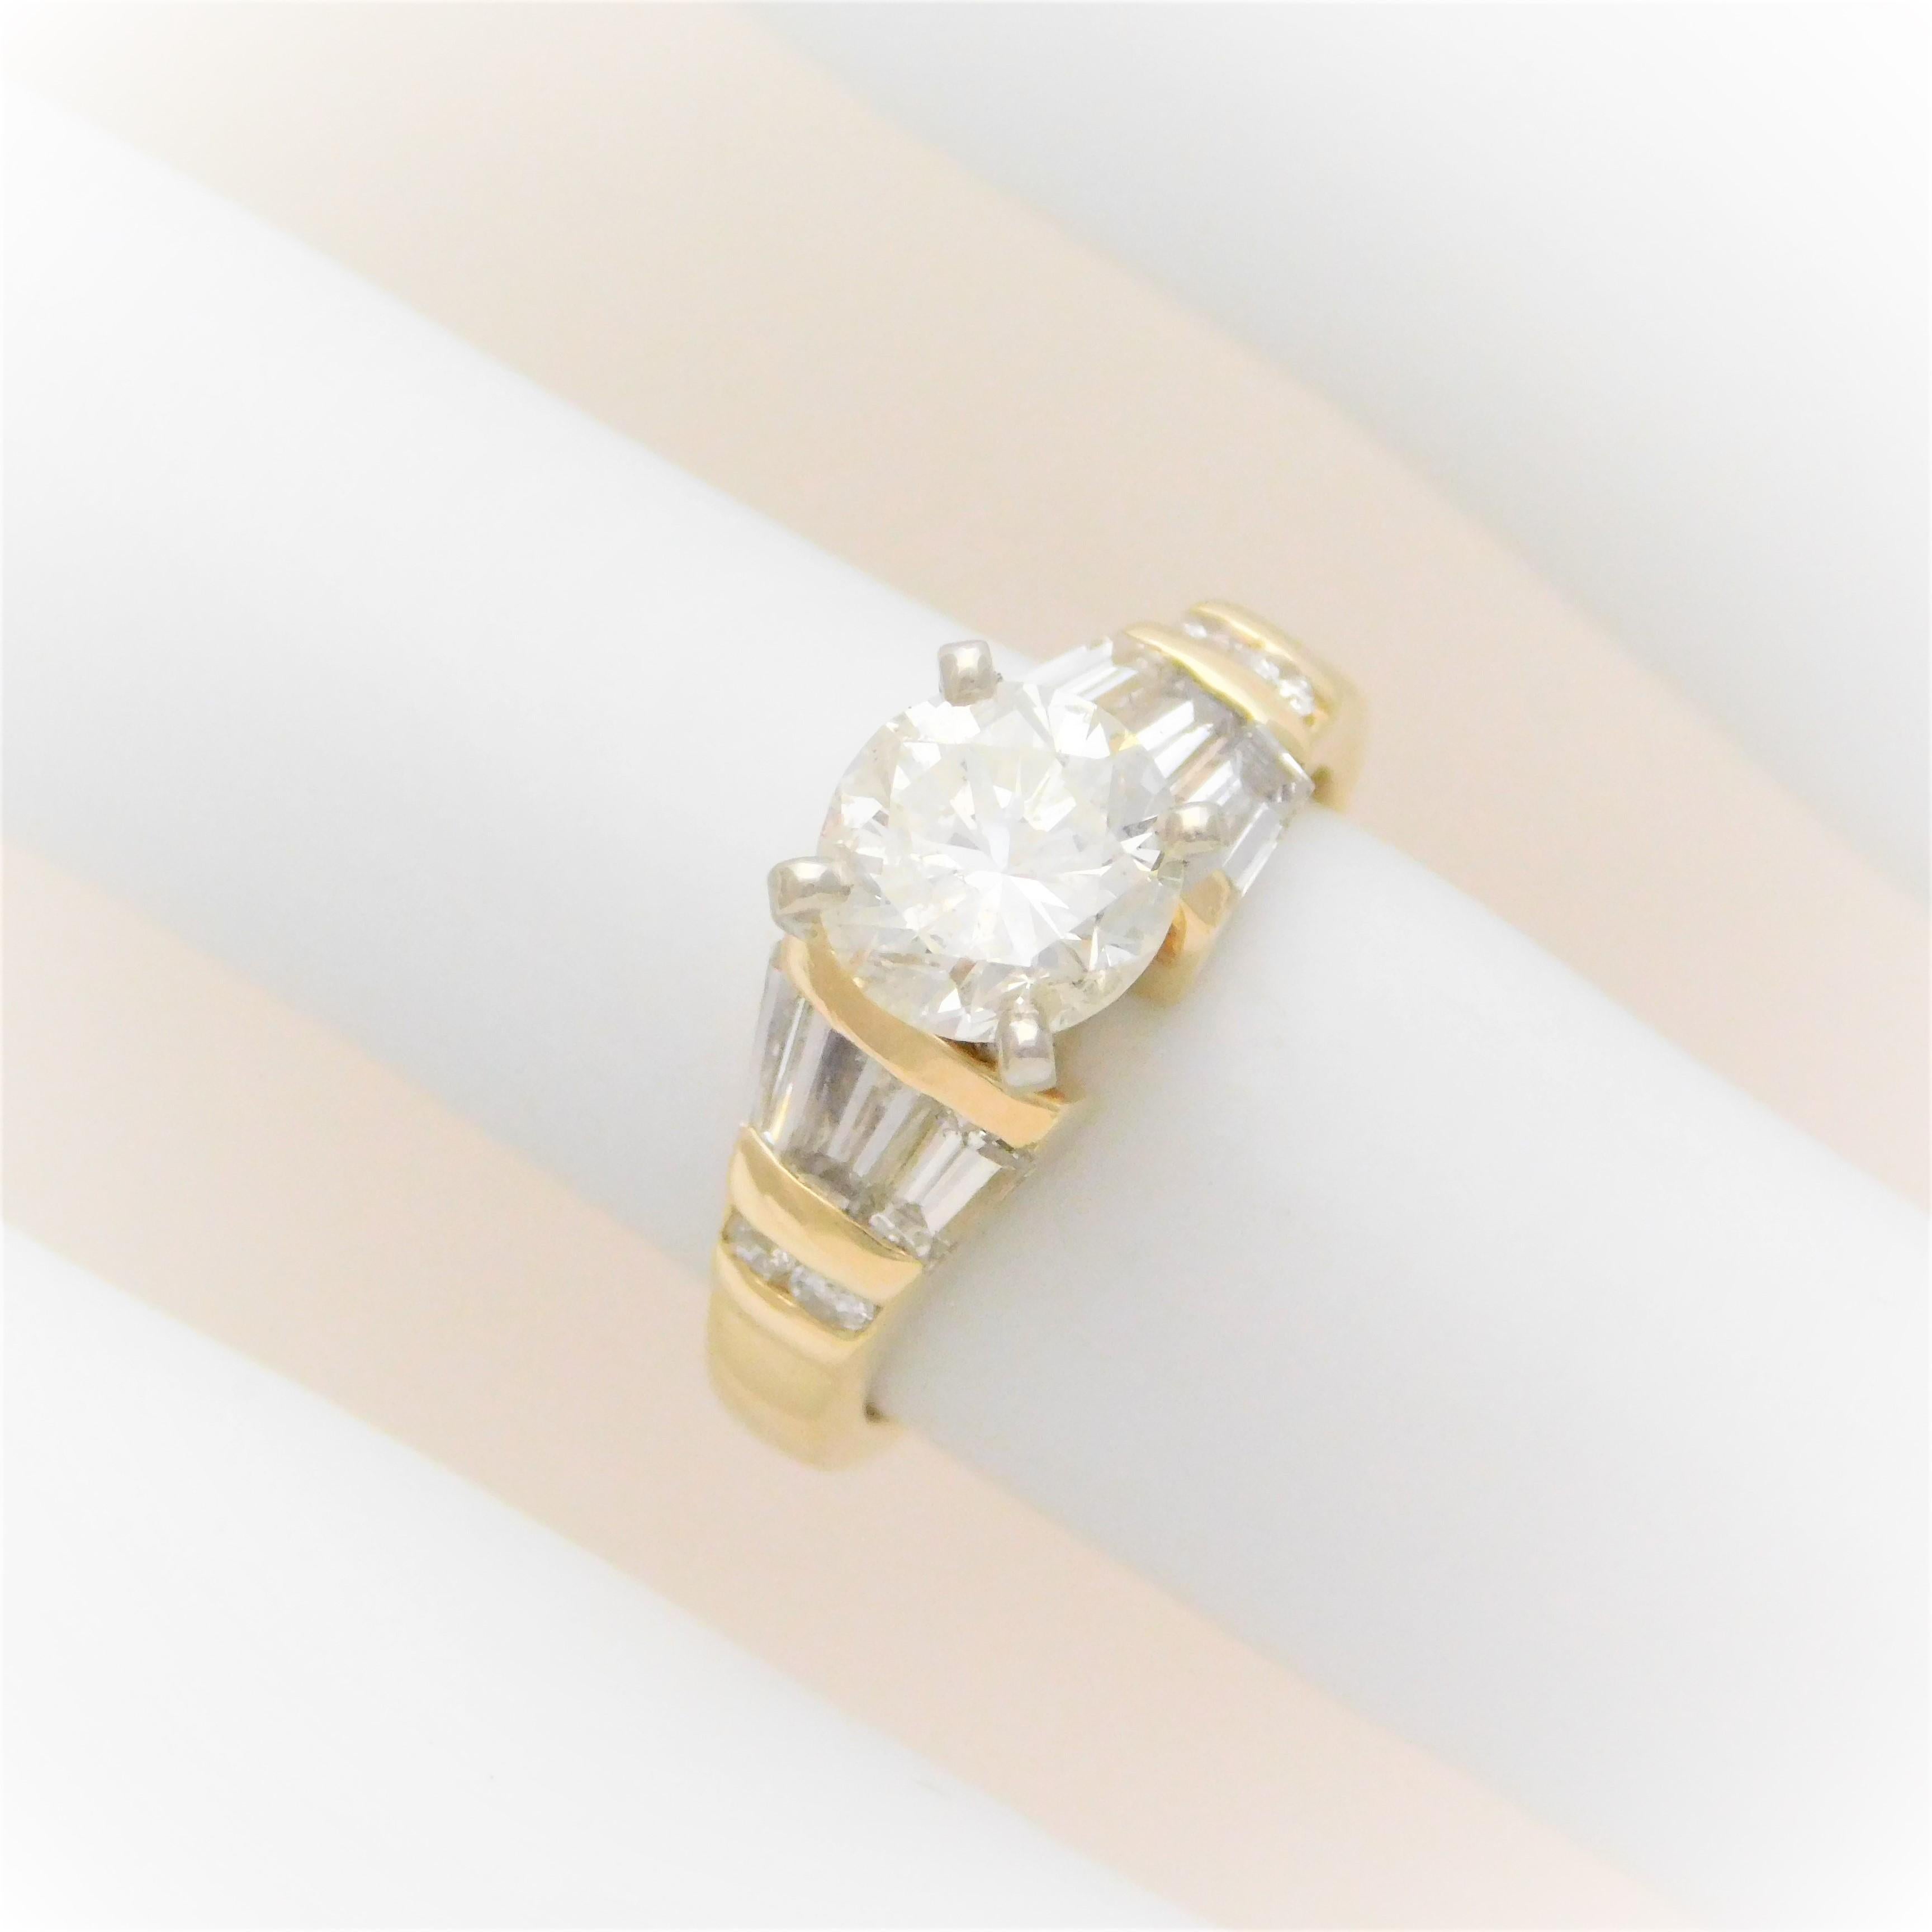 From a Southern estate.  Circa 1990.  This engagement style ring has been crafted in solid 14k yellow gold with a white gold head.  It has been adorned with a lovely 1.32ct round brilliant-cut natural diamond as its miraculous center stone.  This